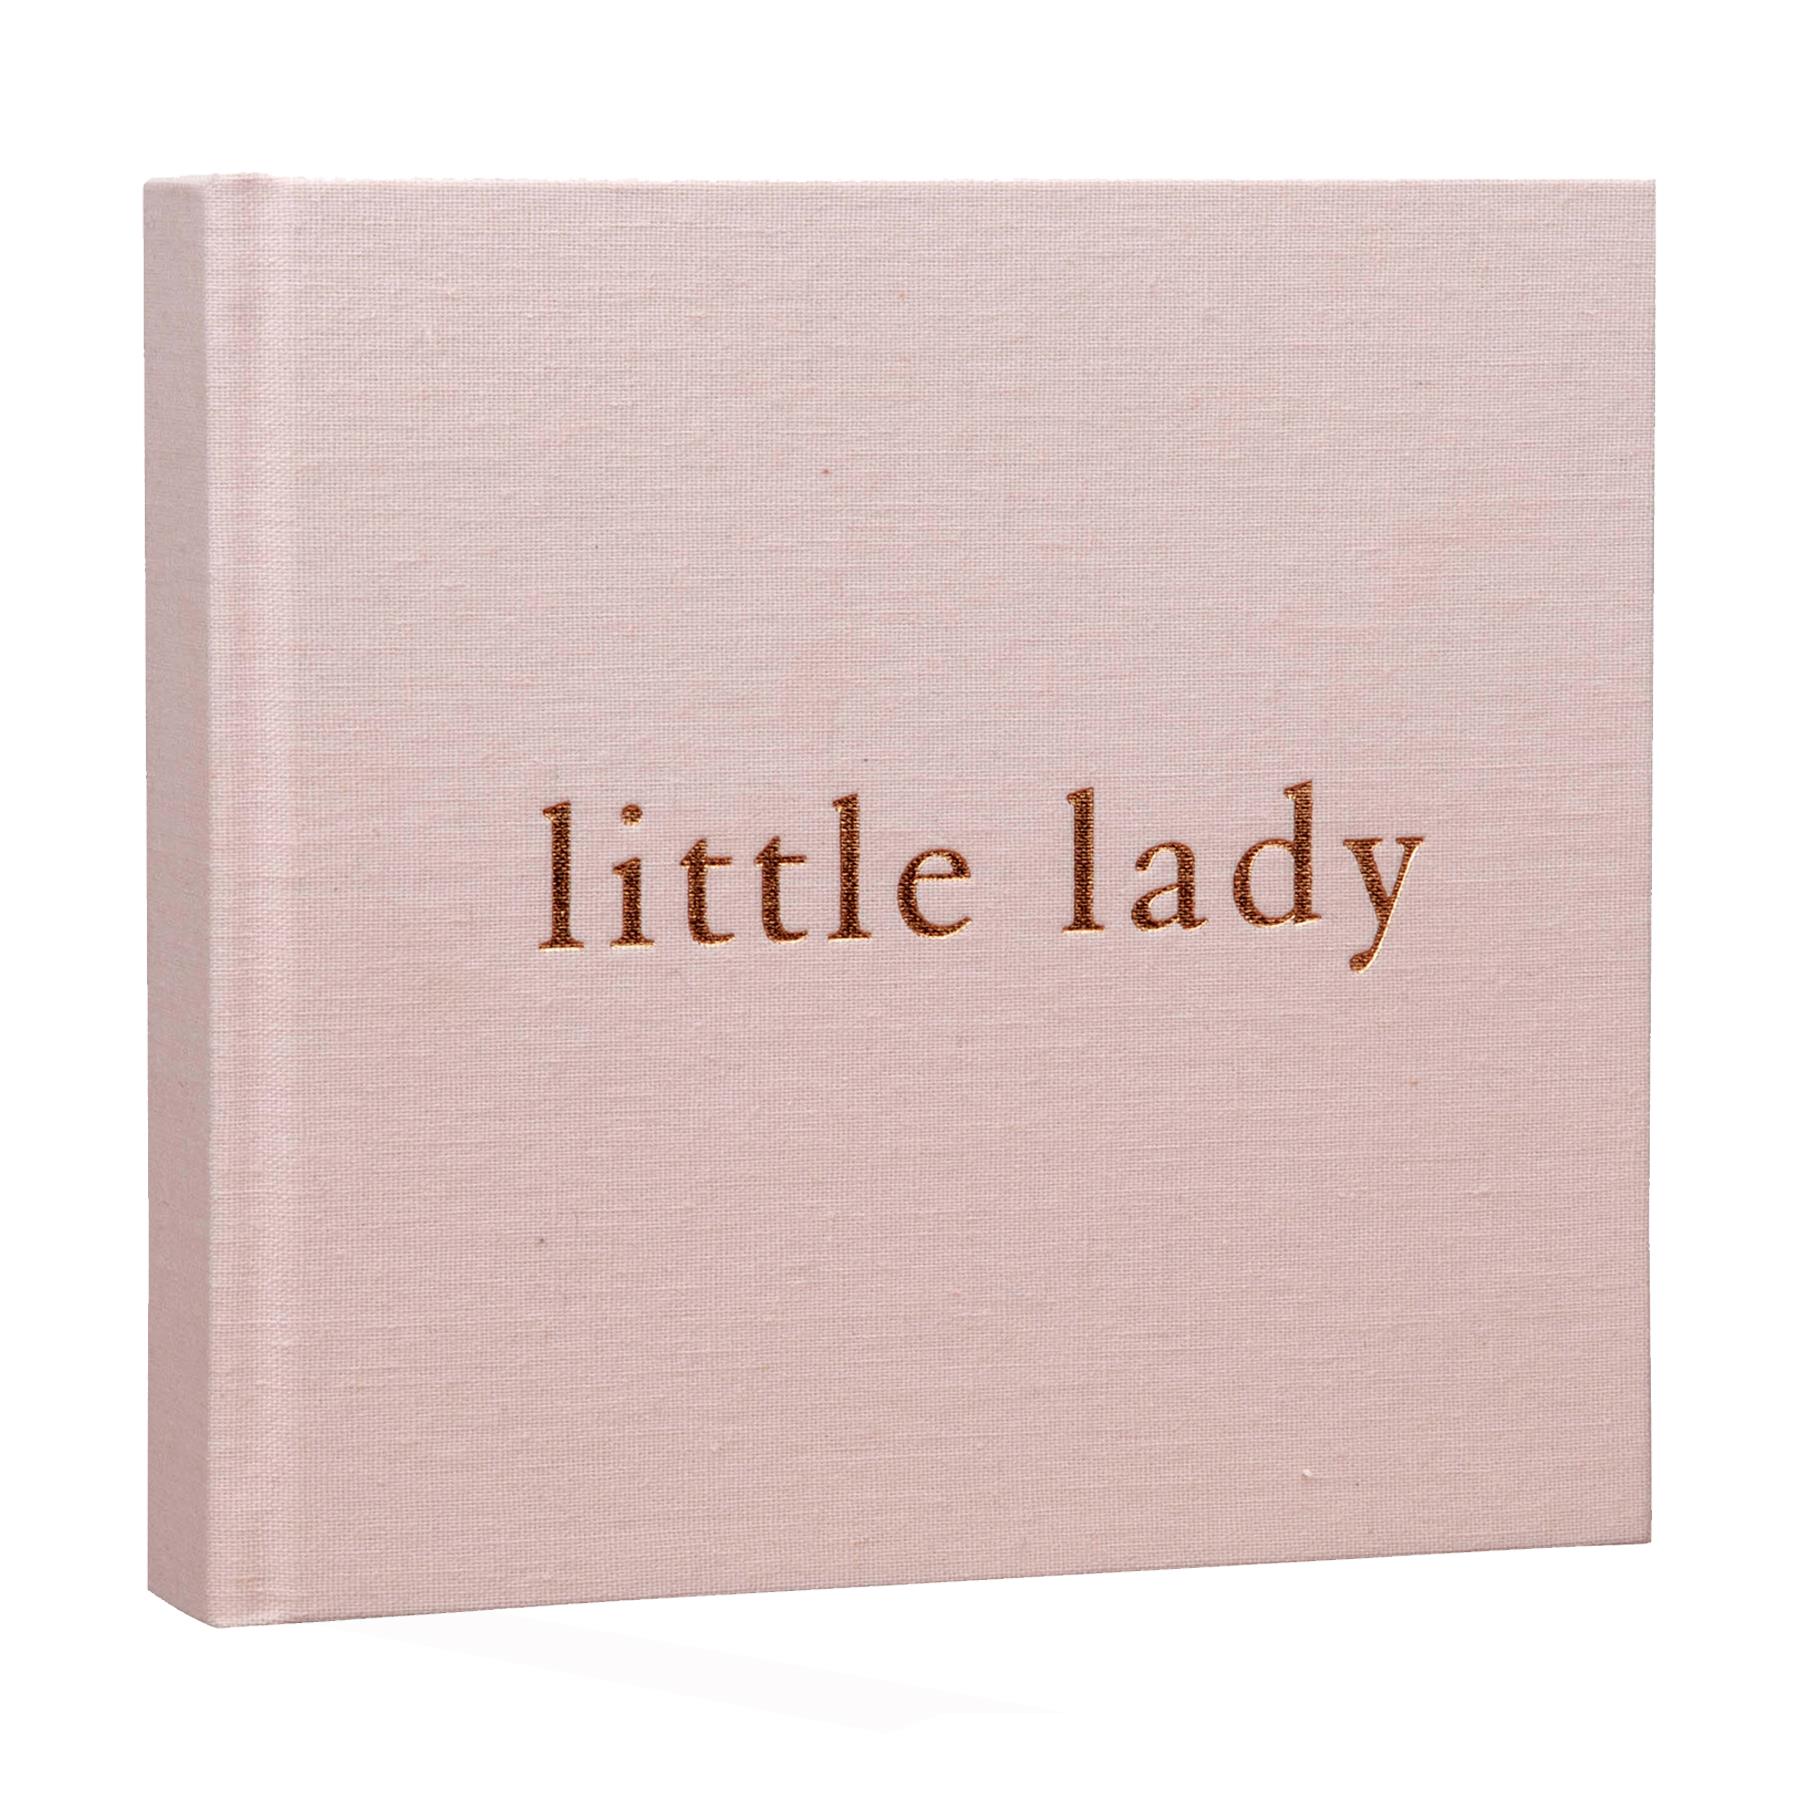 Bambino Pink Linen Cover Photo Album 50 6x4 Pictures - Little Lady